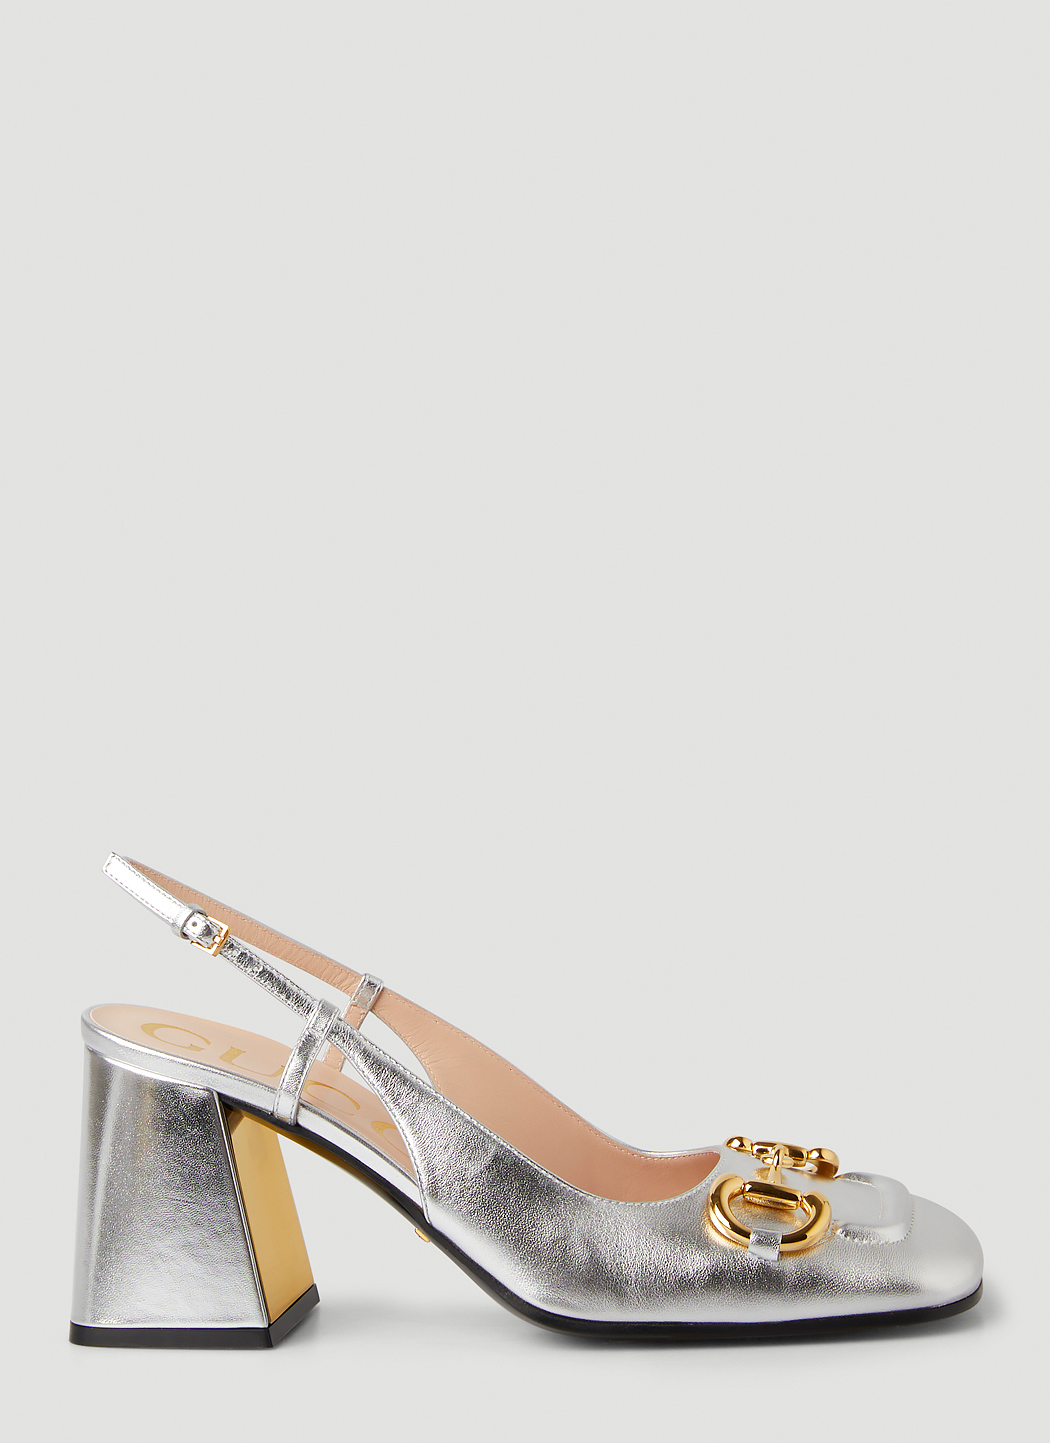 Pin by Aketch on Shoes | Gucci shoes heels, Women shoes, Gucci shoes